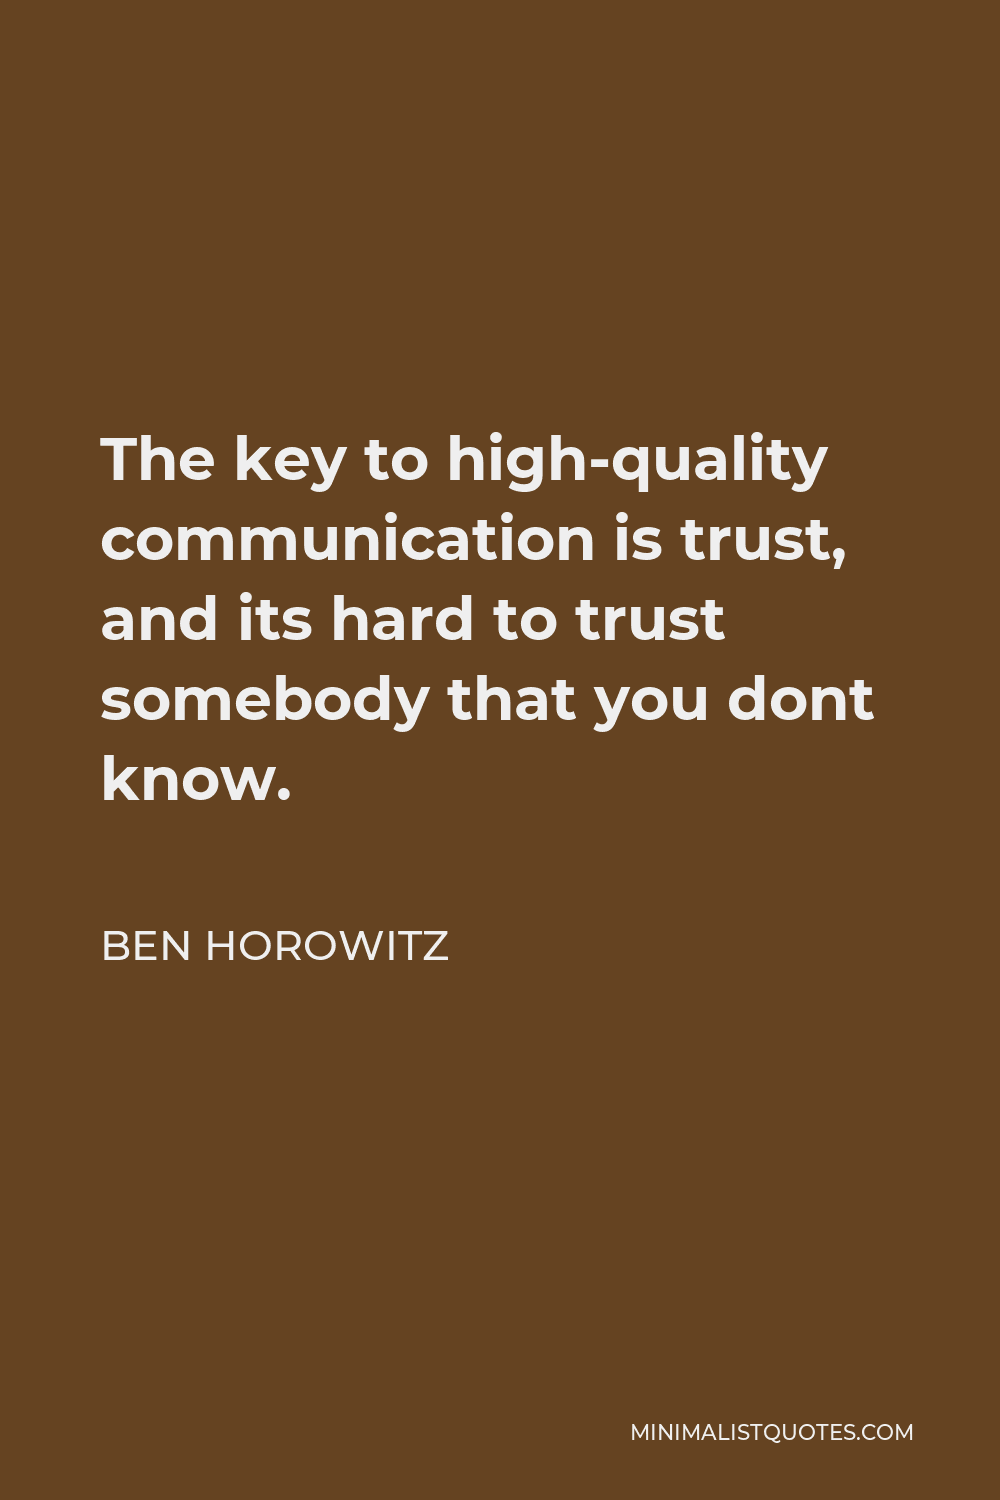 Ben Horowitz Quote - The key to high-quality communication is trust, and its hard to trust somebody that you dont know.